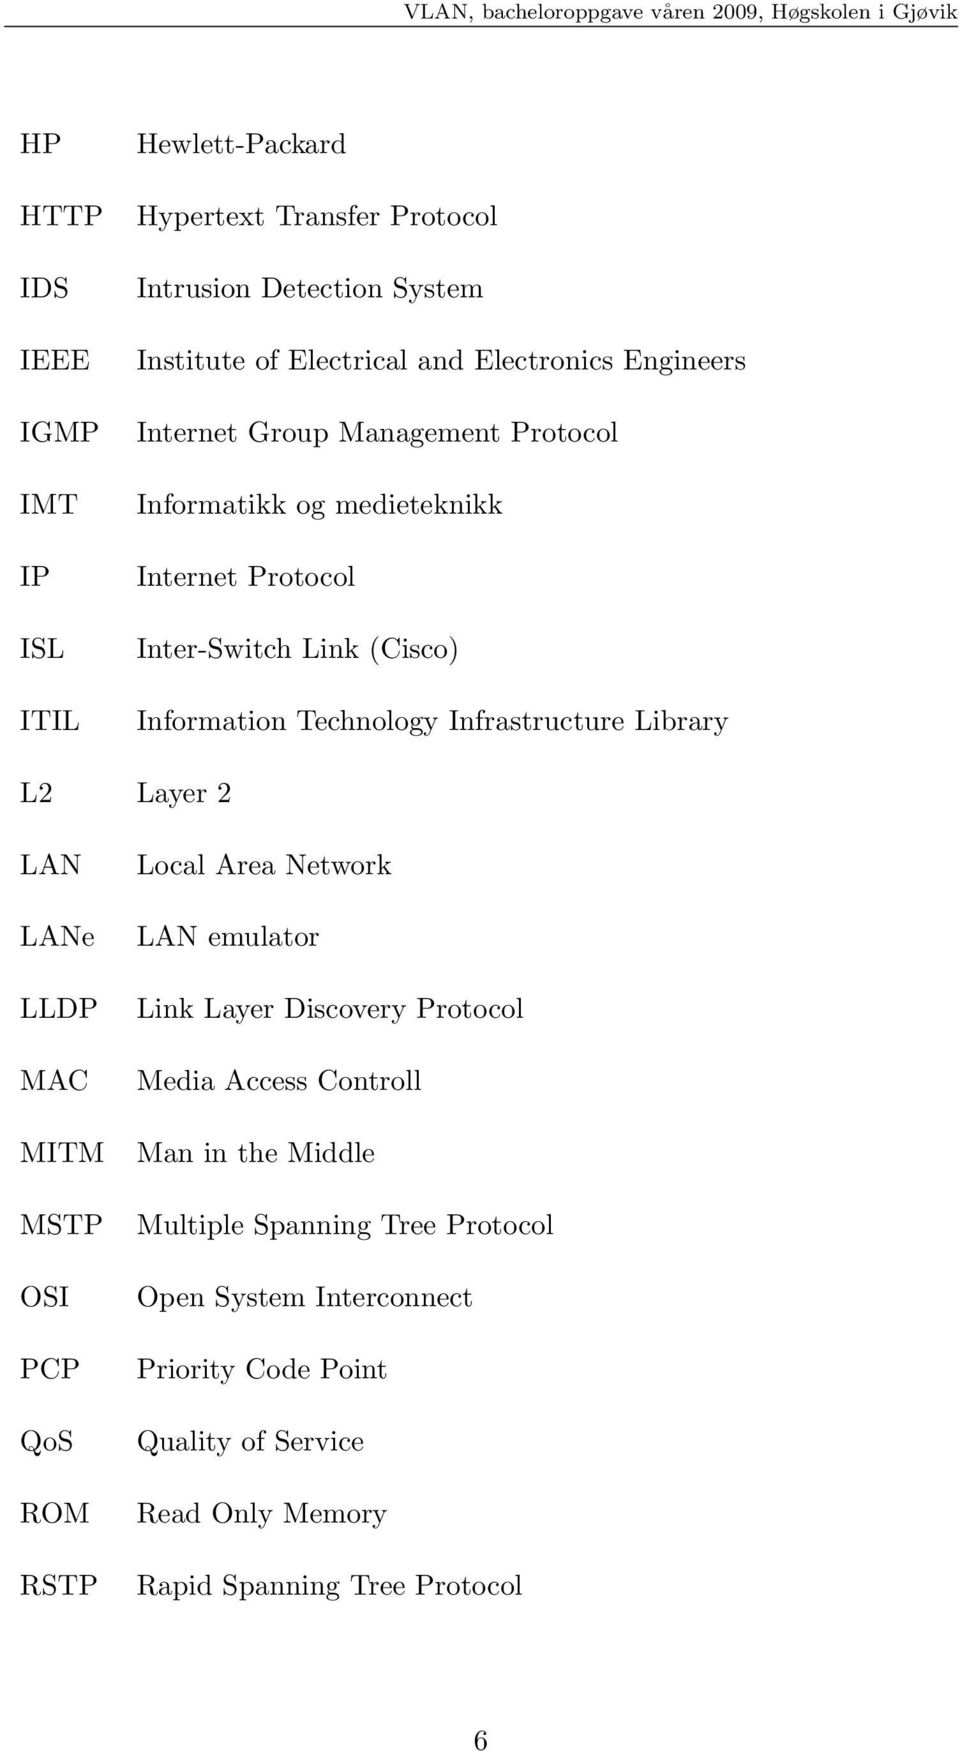 Library L2 Layer 2 LAN LANe LLDP MAC MITM MSTP OSI PCP QoS ROM RSTP Local Area Network LAN emulator Link Layer Discovery Protocol Media Access Controll